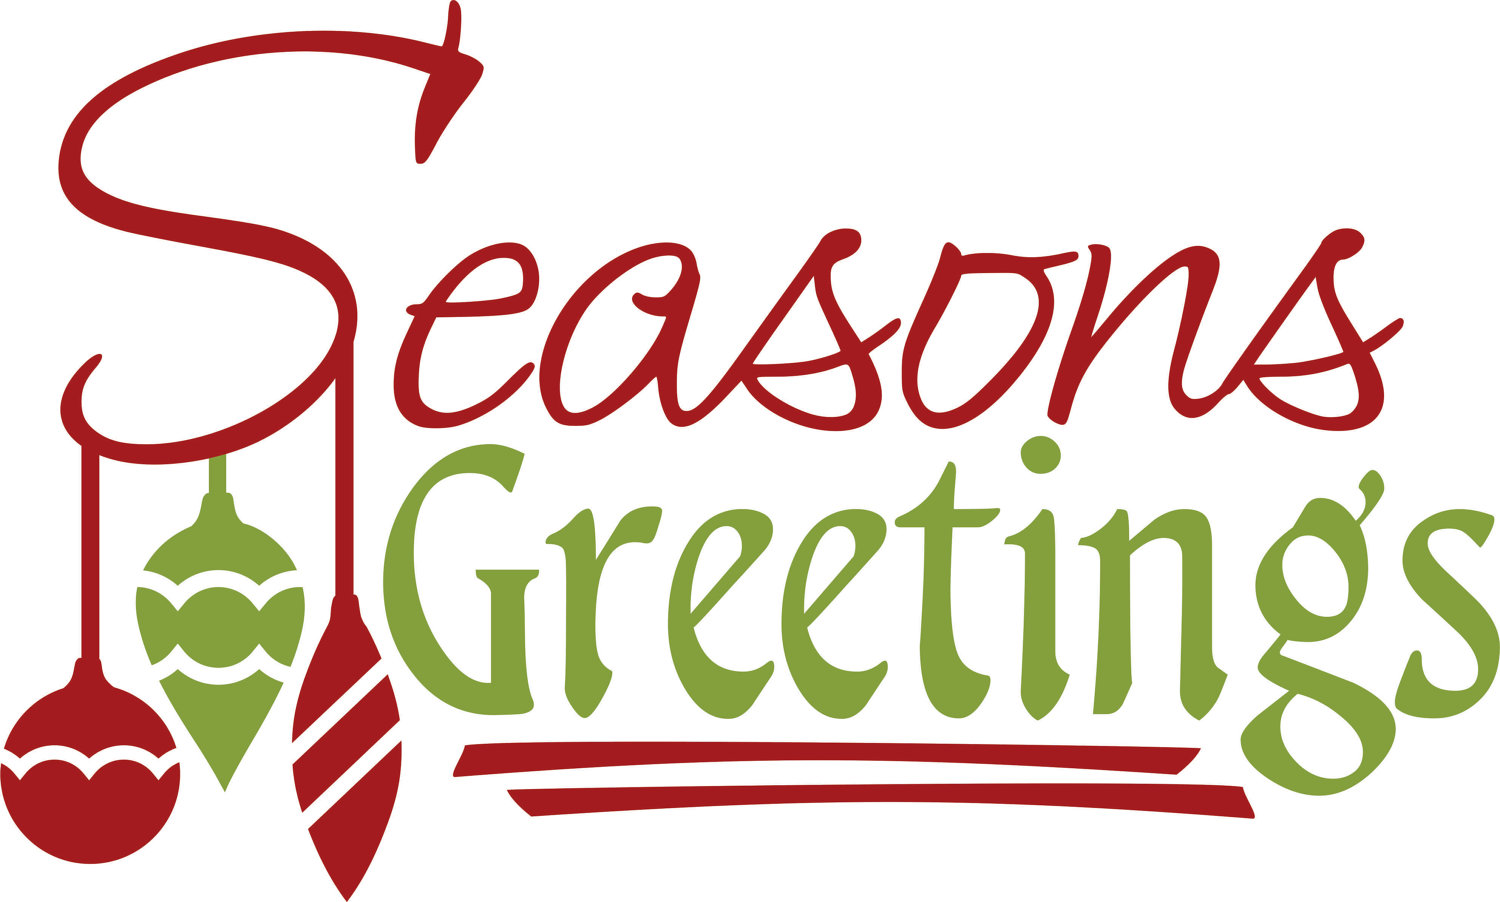 Images For  Seasons Greetings Images